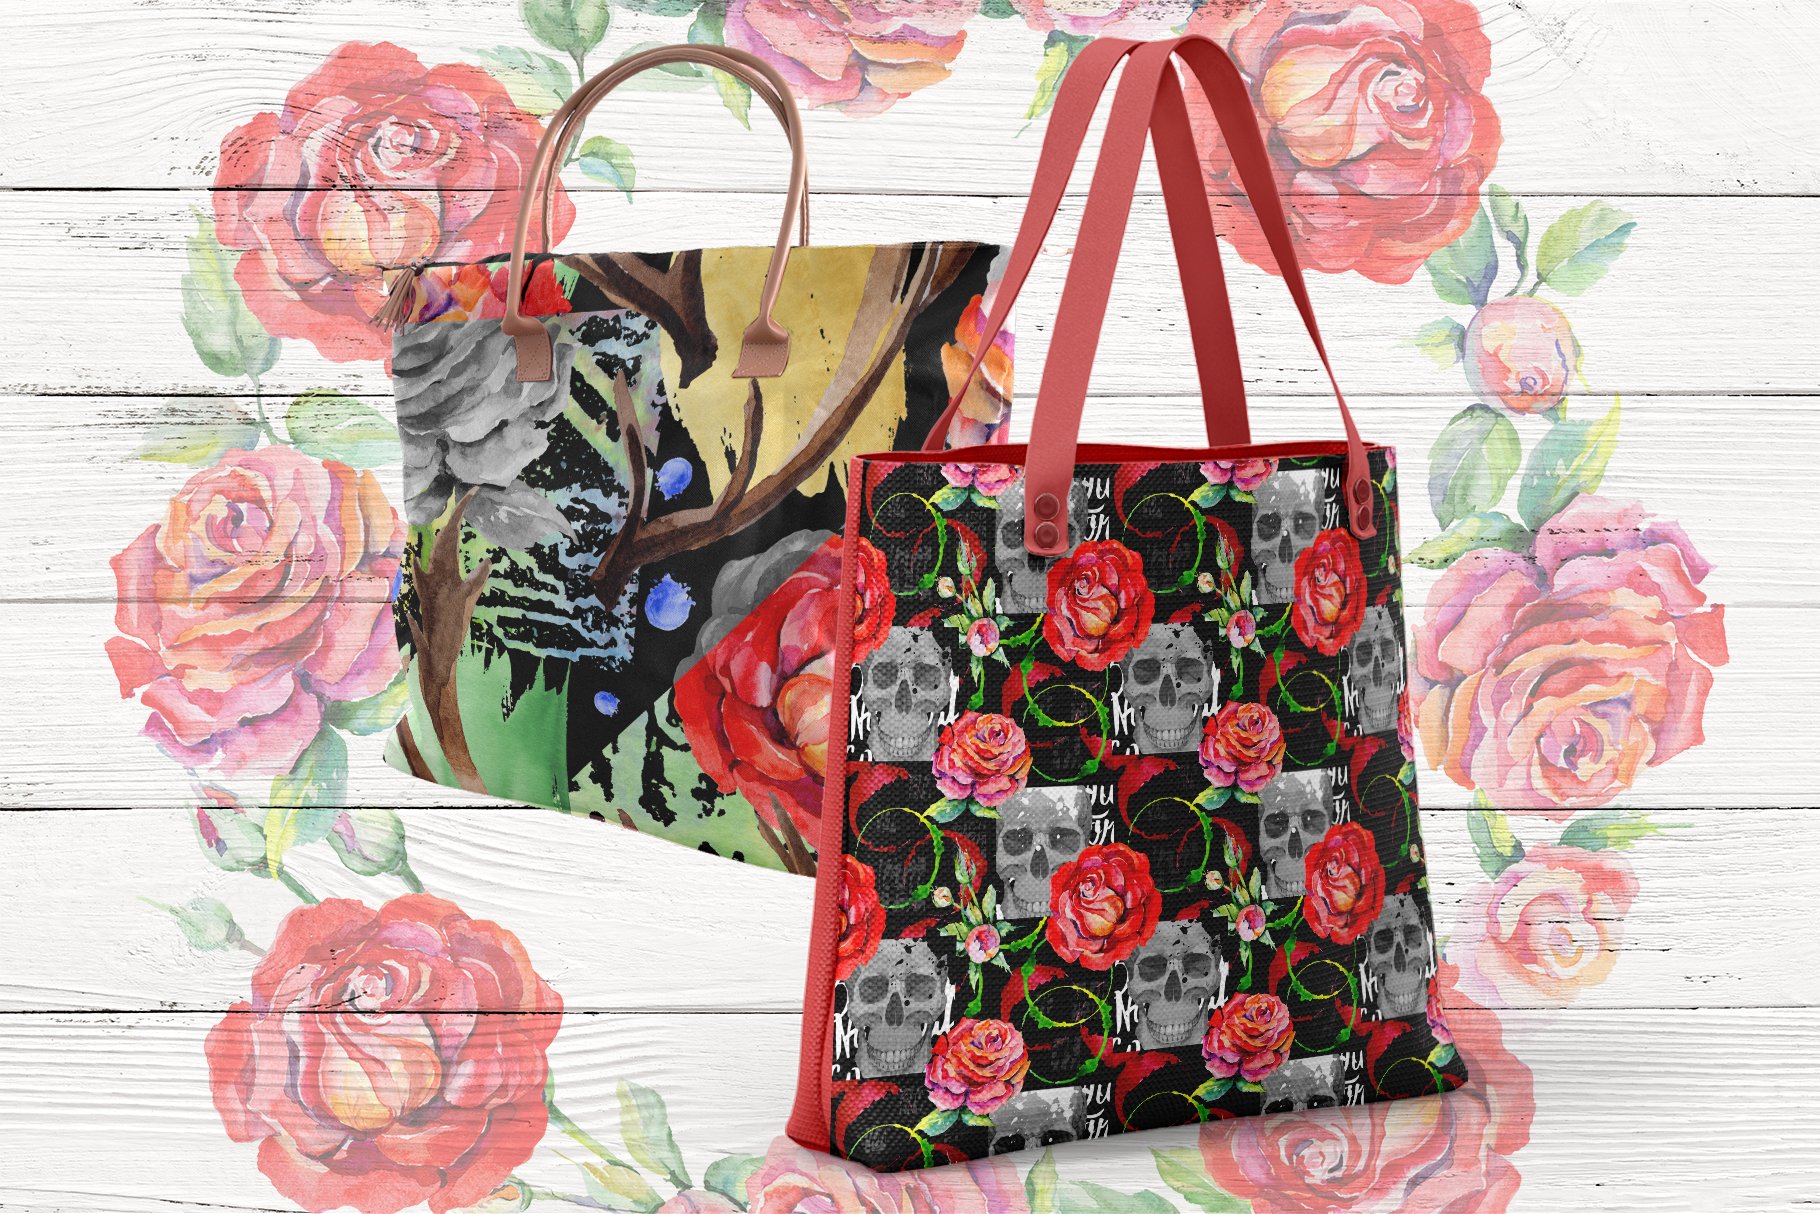 Skull and roses on the bags.